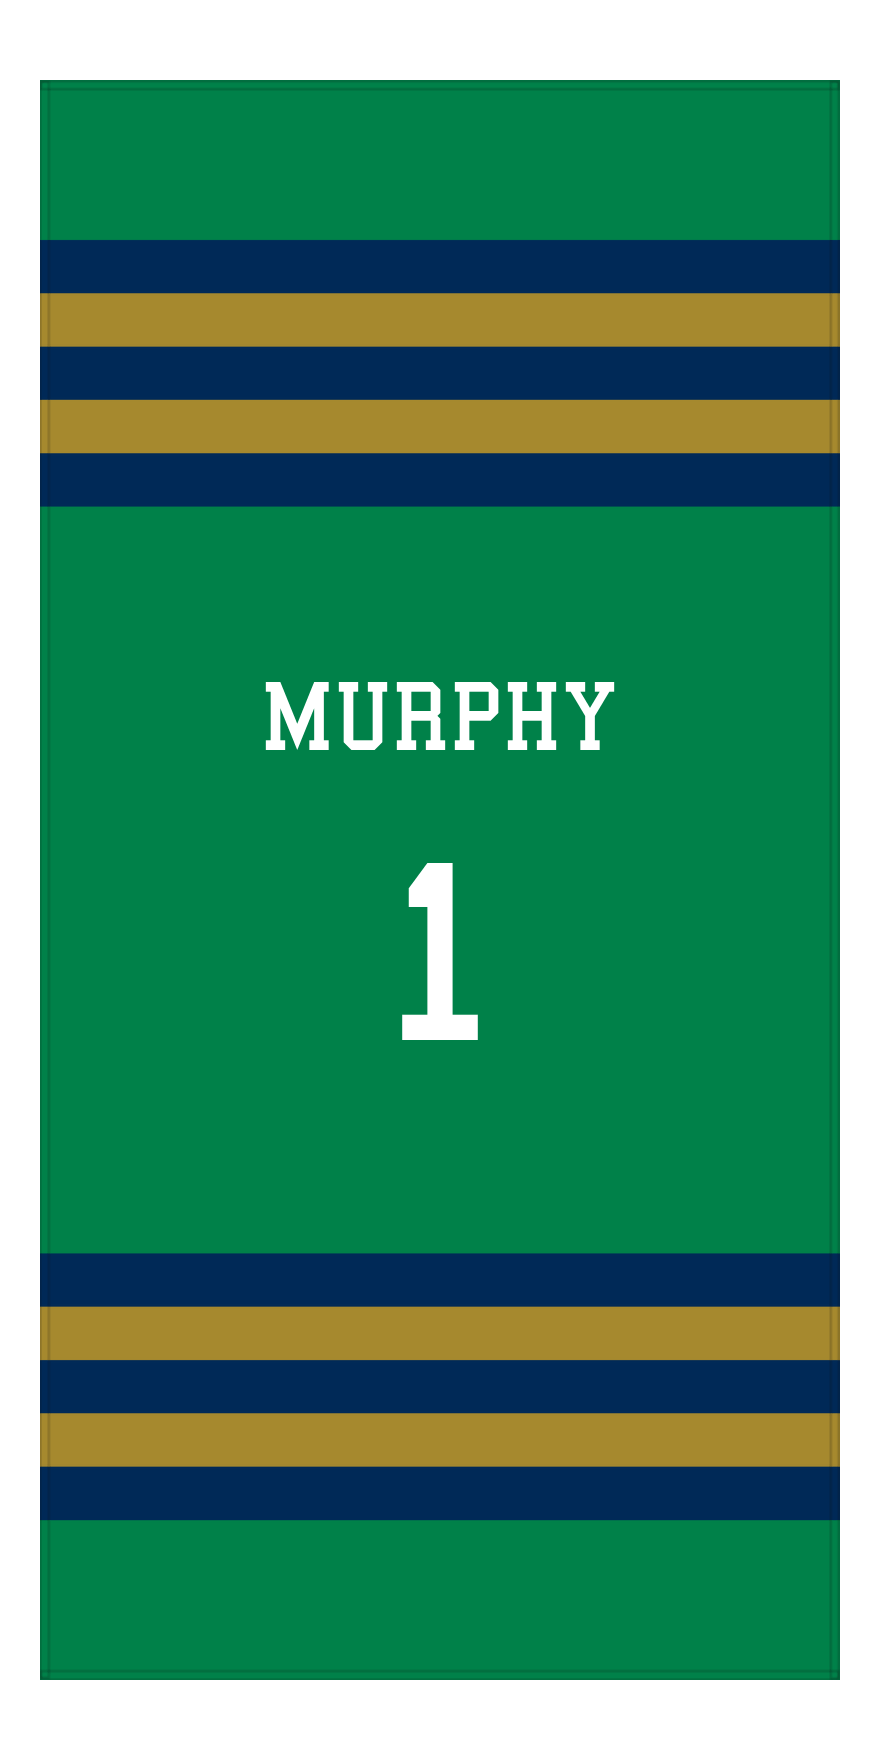 Personalized Jersey Number 2-on-1 Stripes Sports Beach Towel - Green and Gold - Vertical Design - Front View